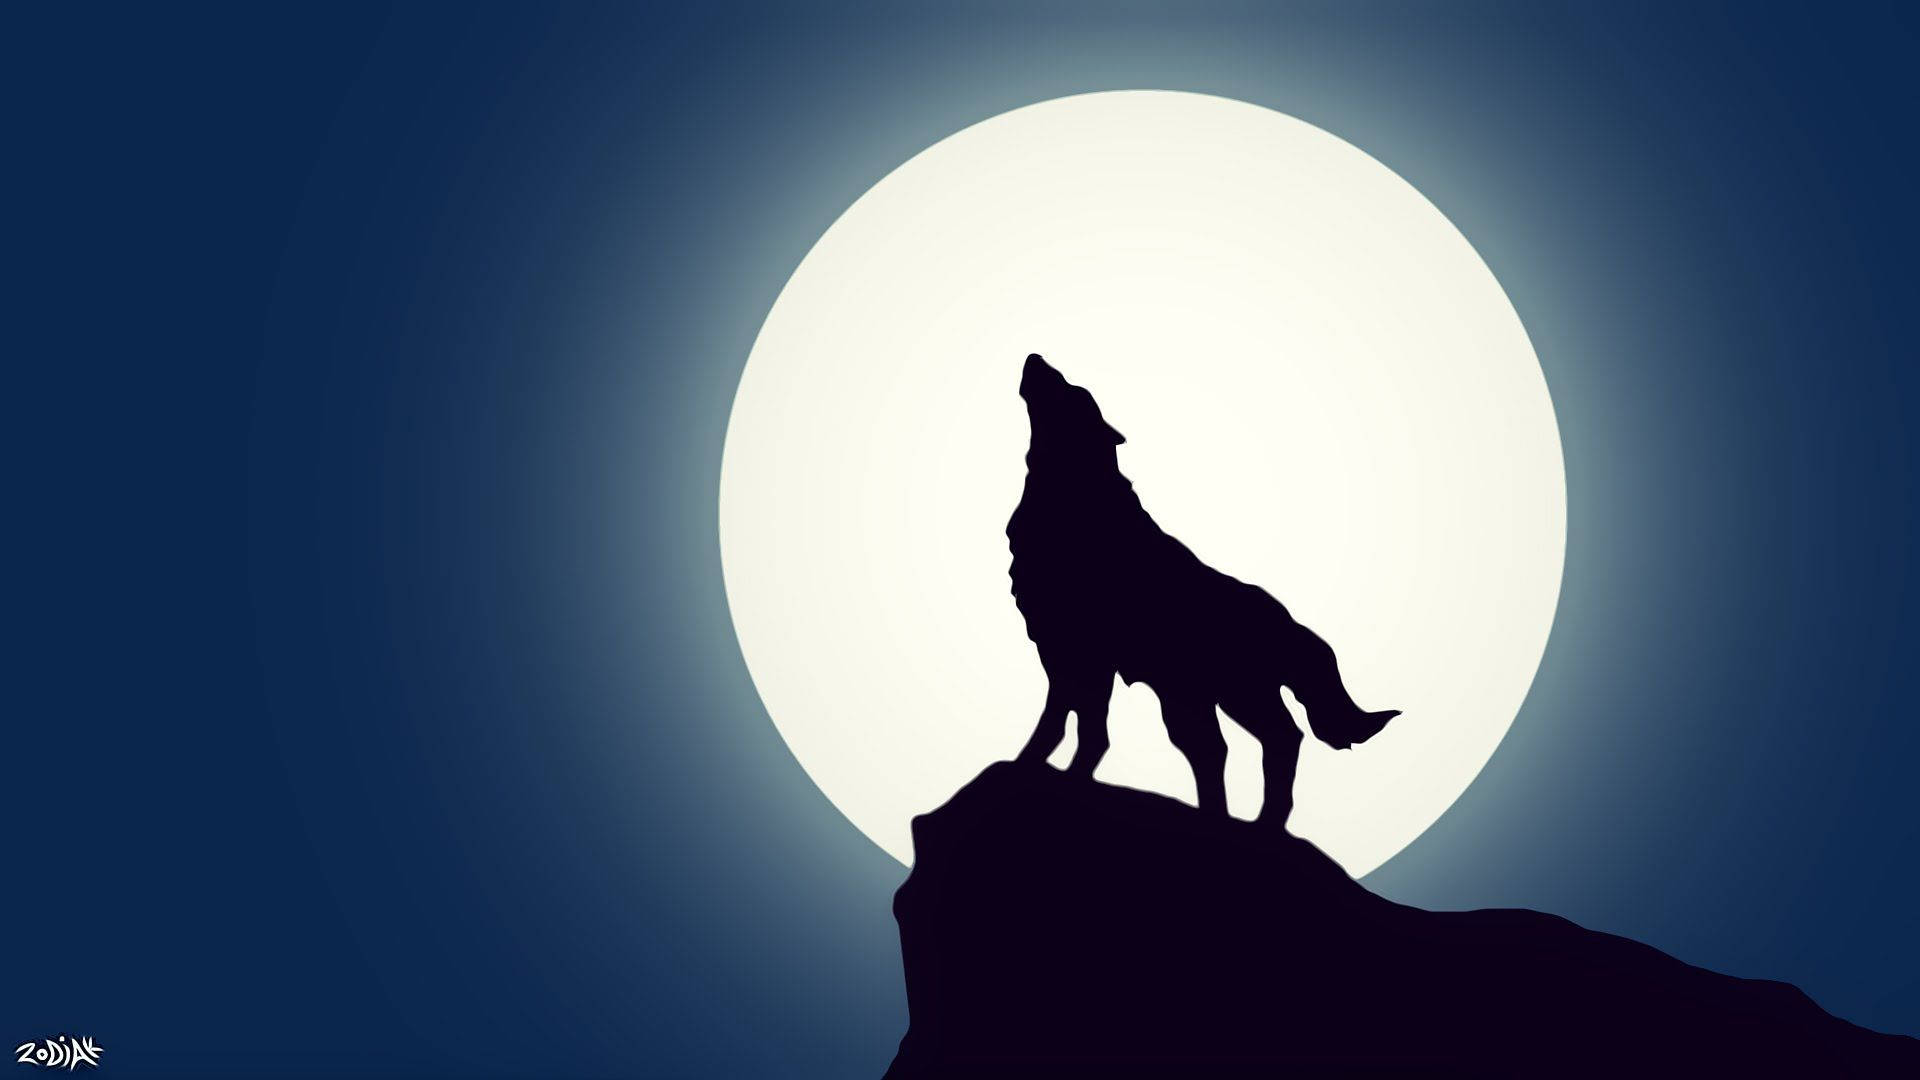 A wolf howls in the night Wallpaper